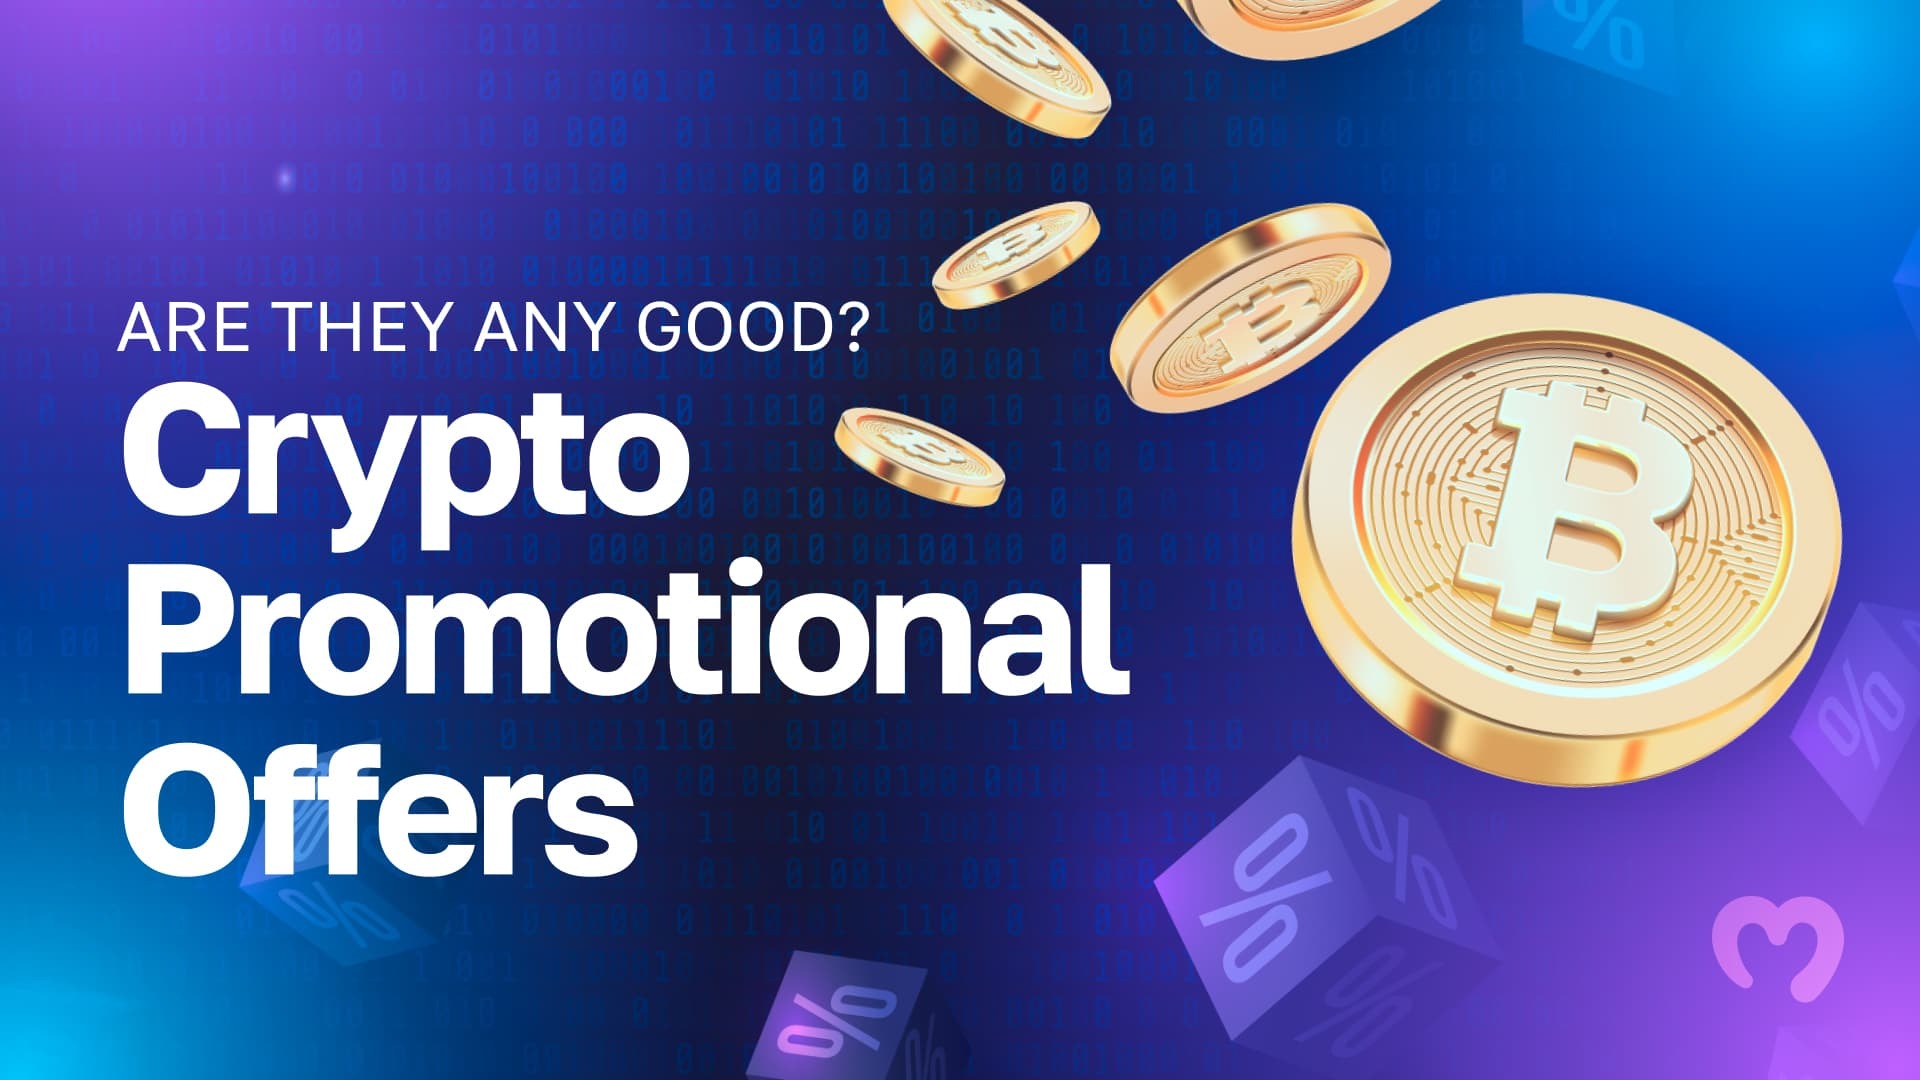 22_11_Crypto-Promotional-Offers--Are-They-Any-Good- (1)